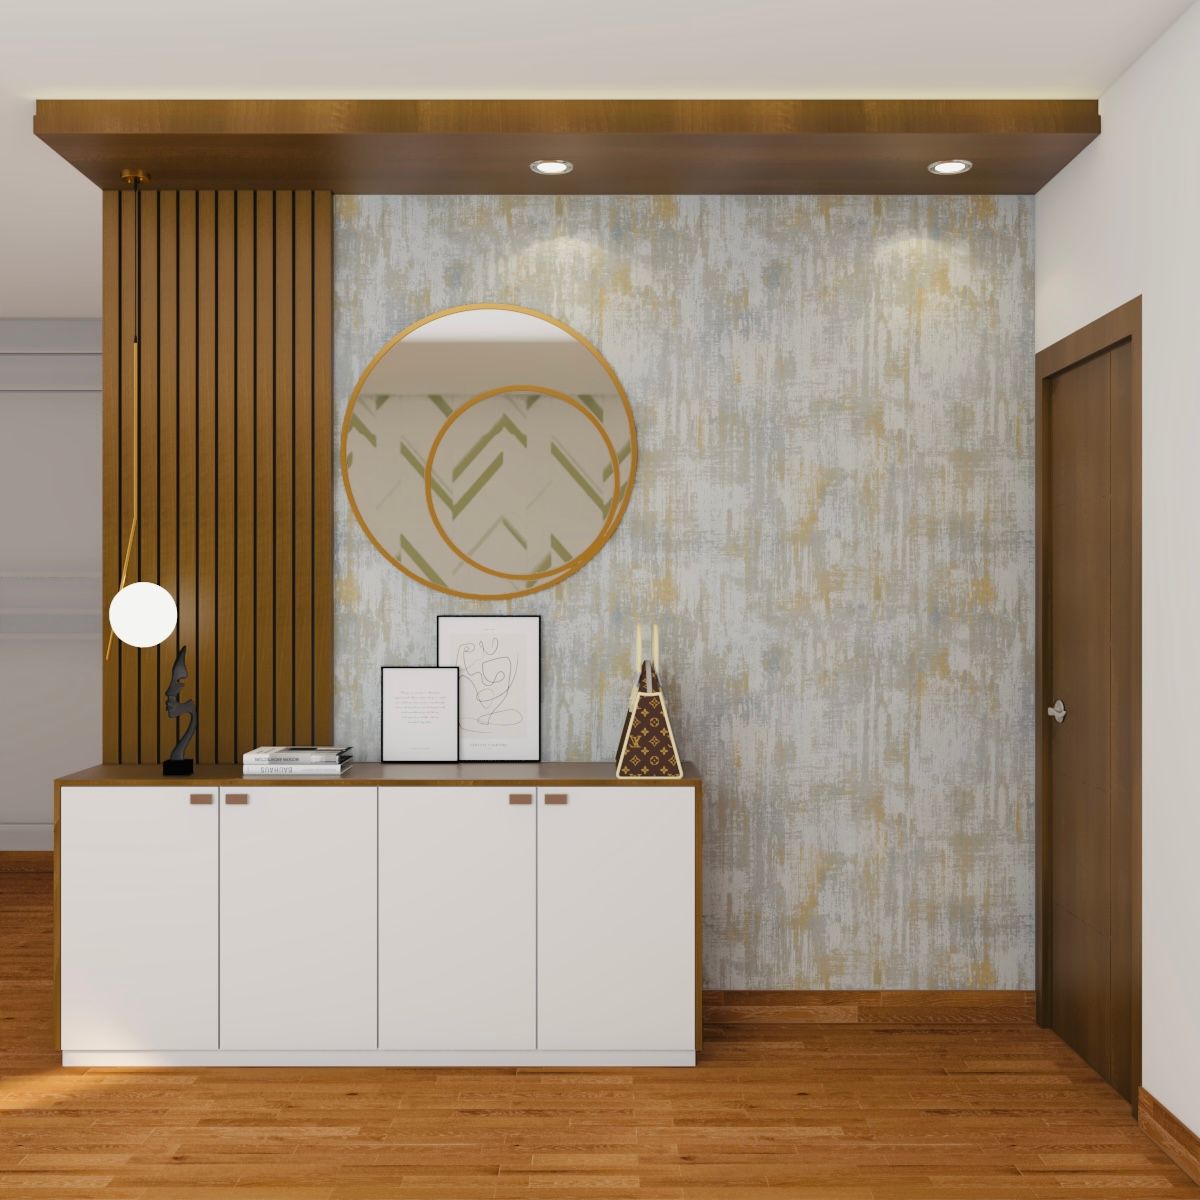 Contemporary Foyer Design With Wooden Ceiling And Fluted Panels